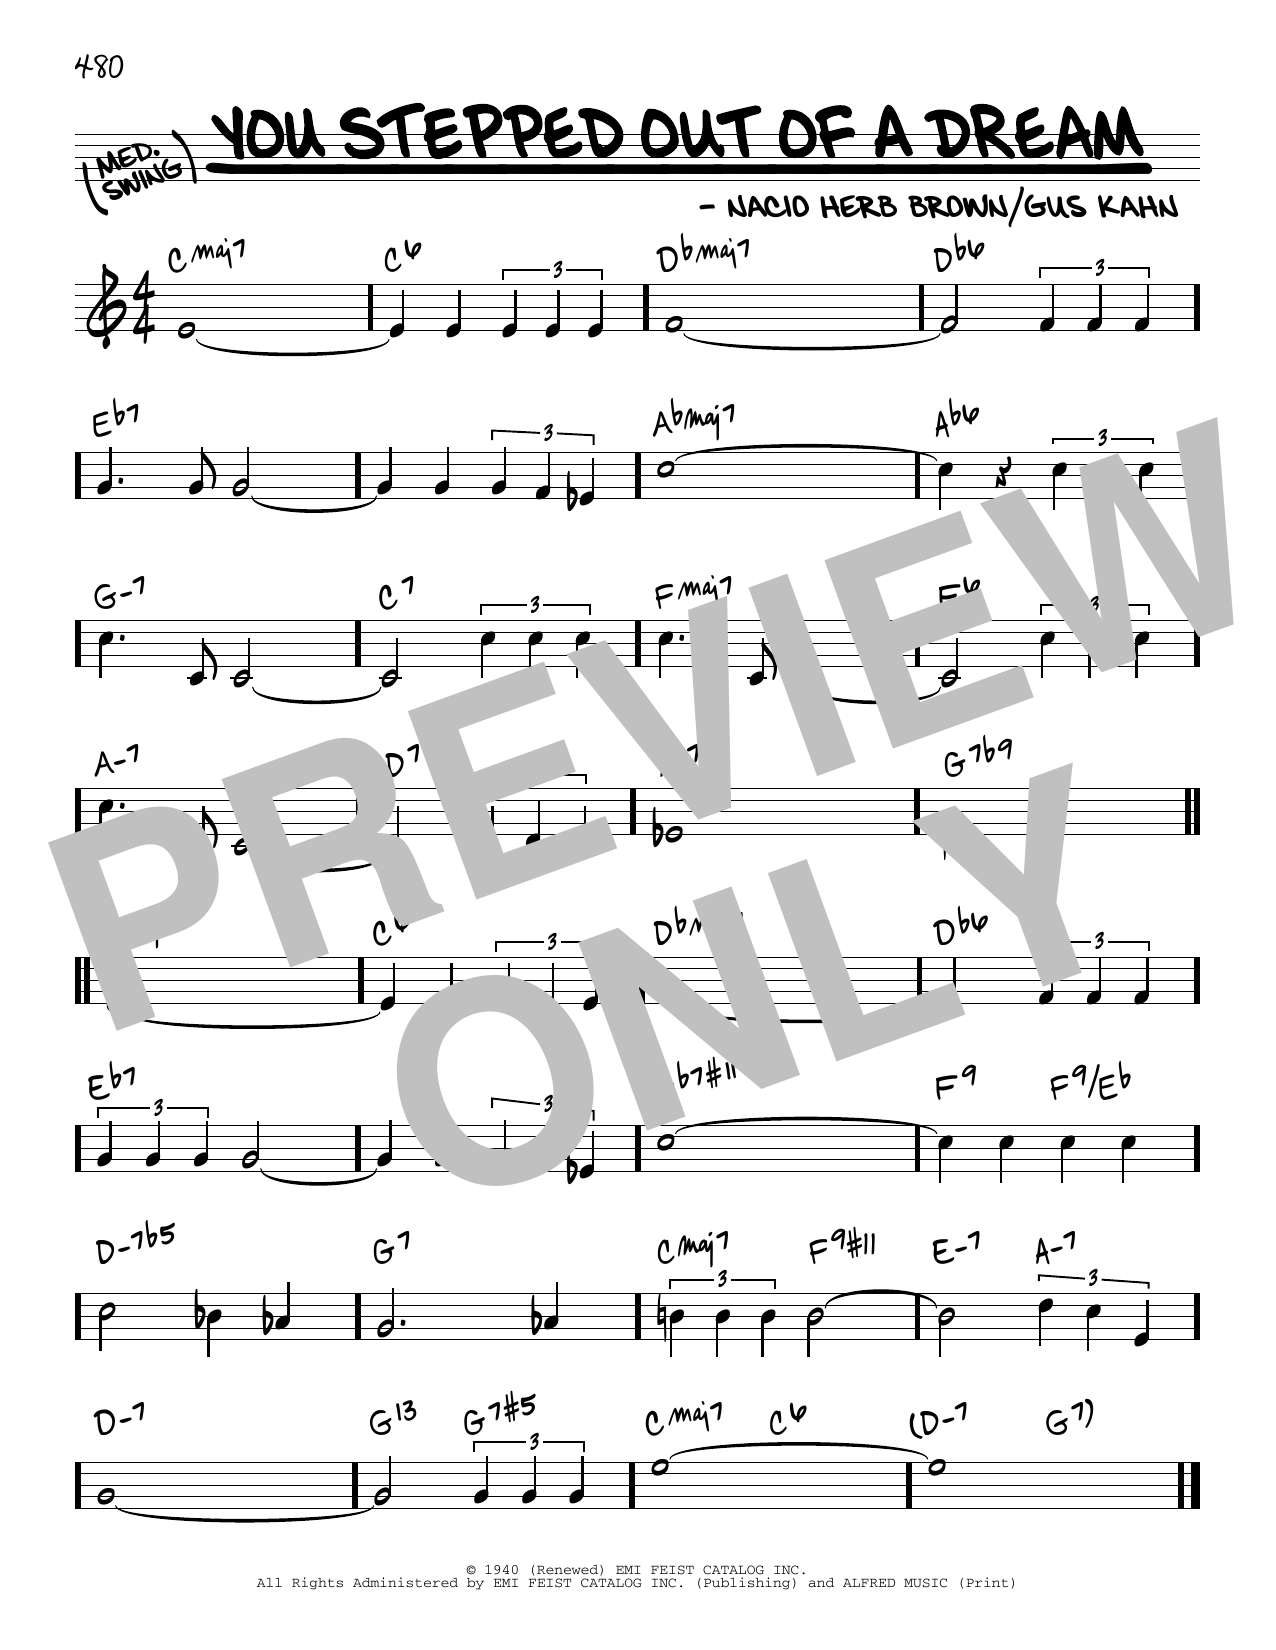 Download Gus Kahn You Stepped Out Of A Dream Sheet Music